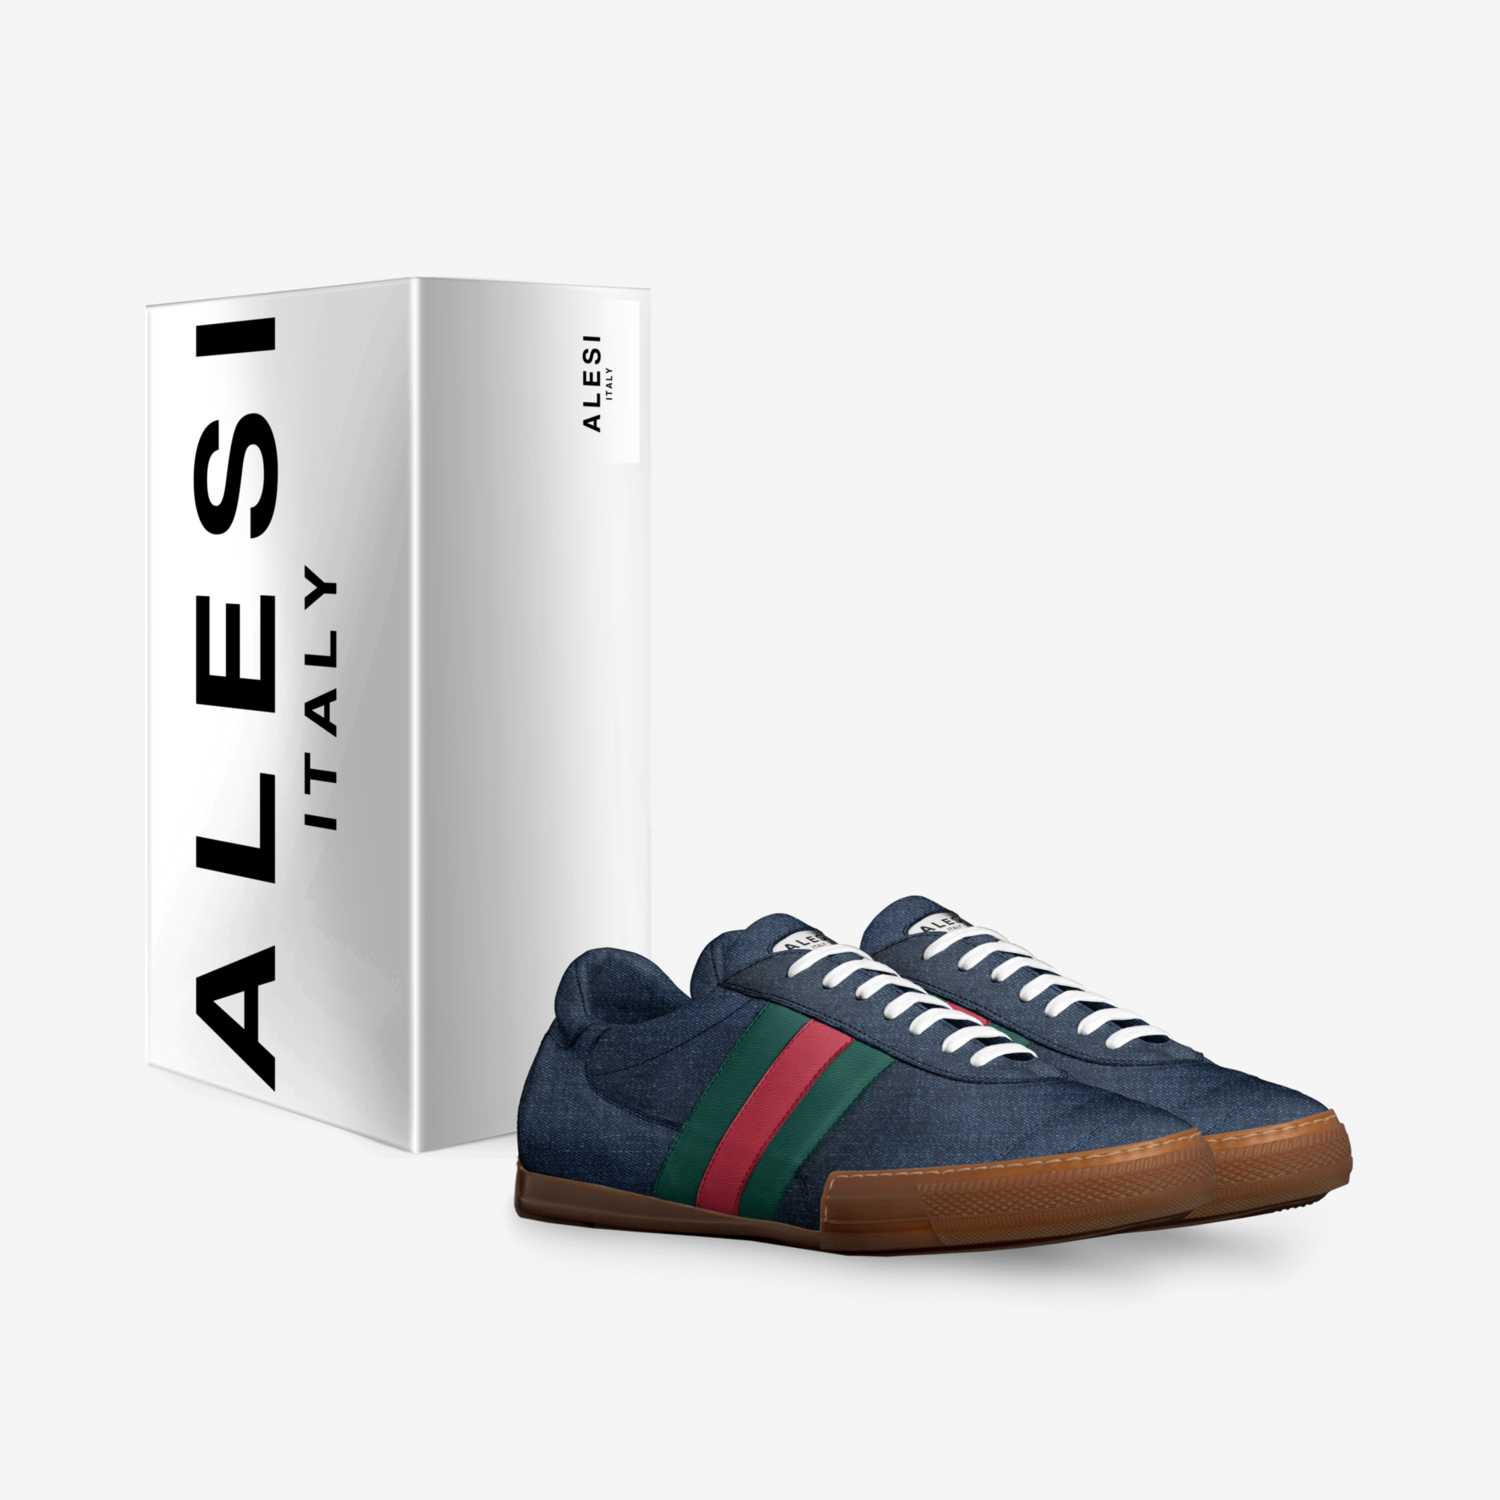 ALESI SOCCER custom made in Italy shoes by Lonanthony Parker | Box view